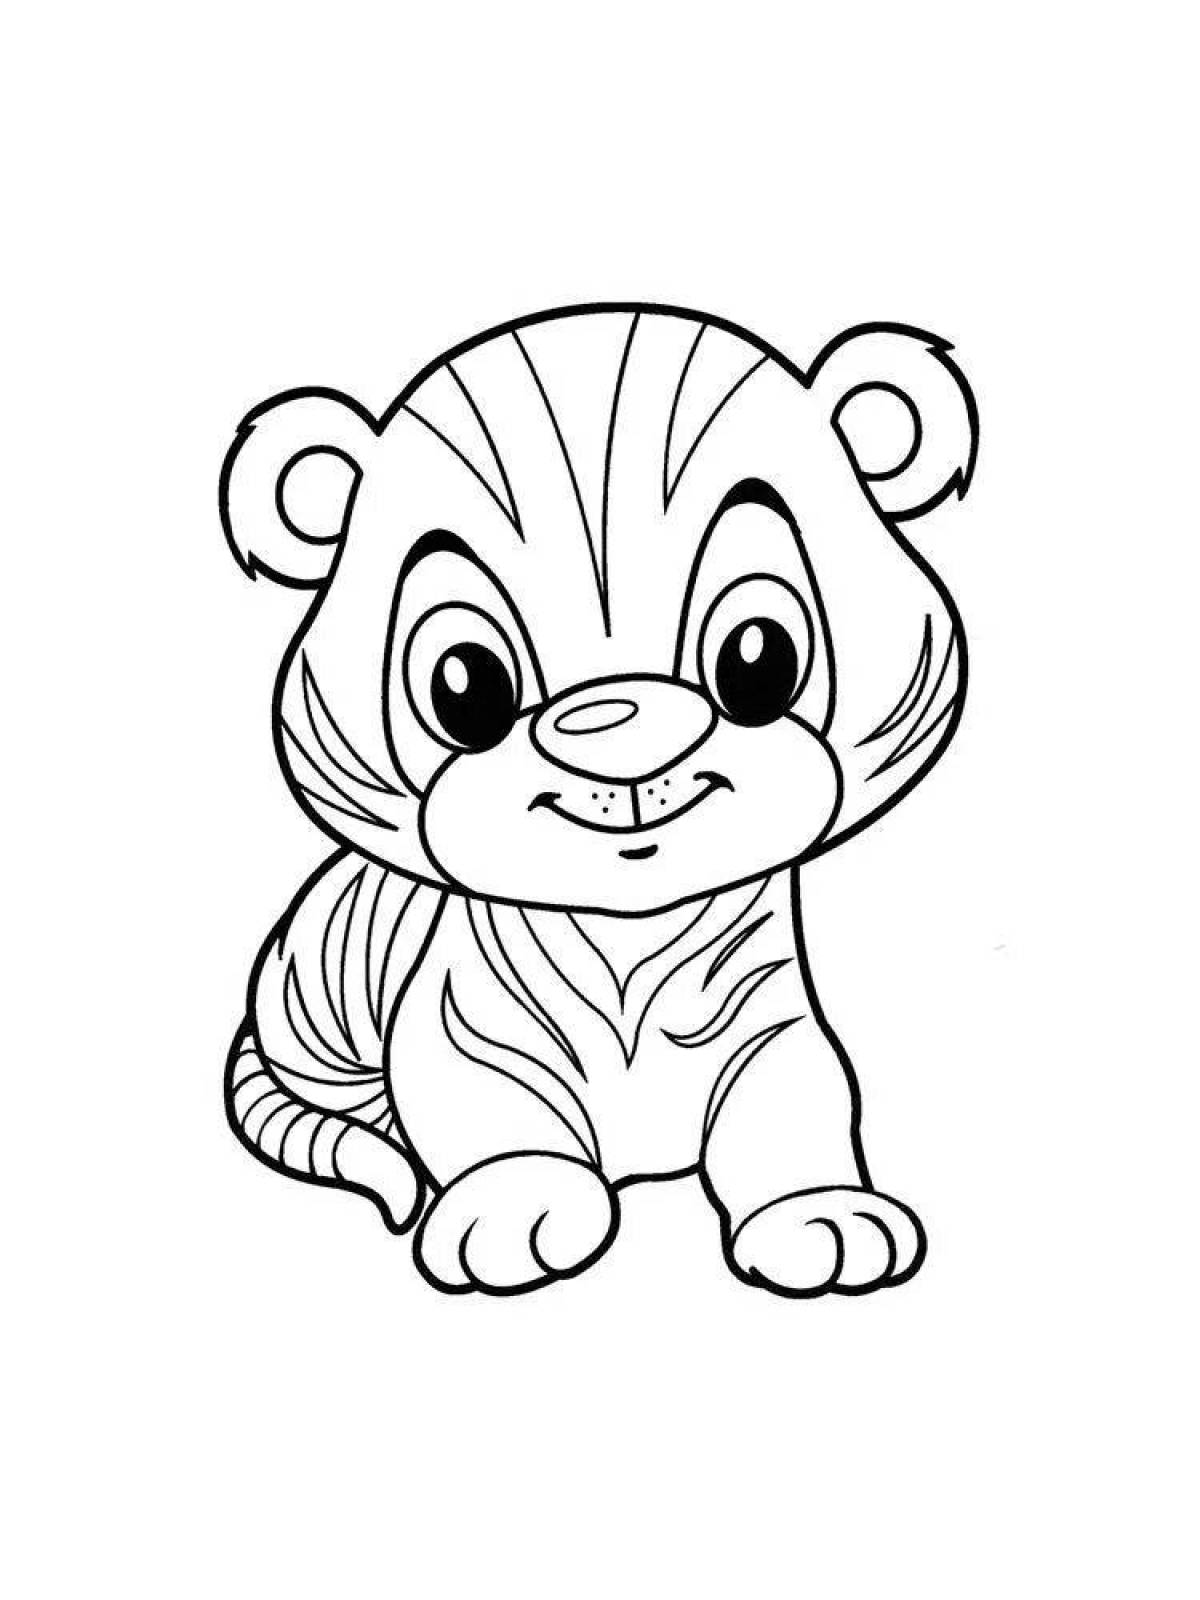 Living tiger coloring page for kids